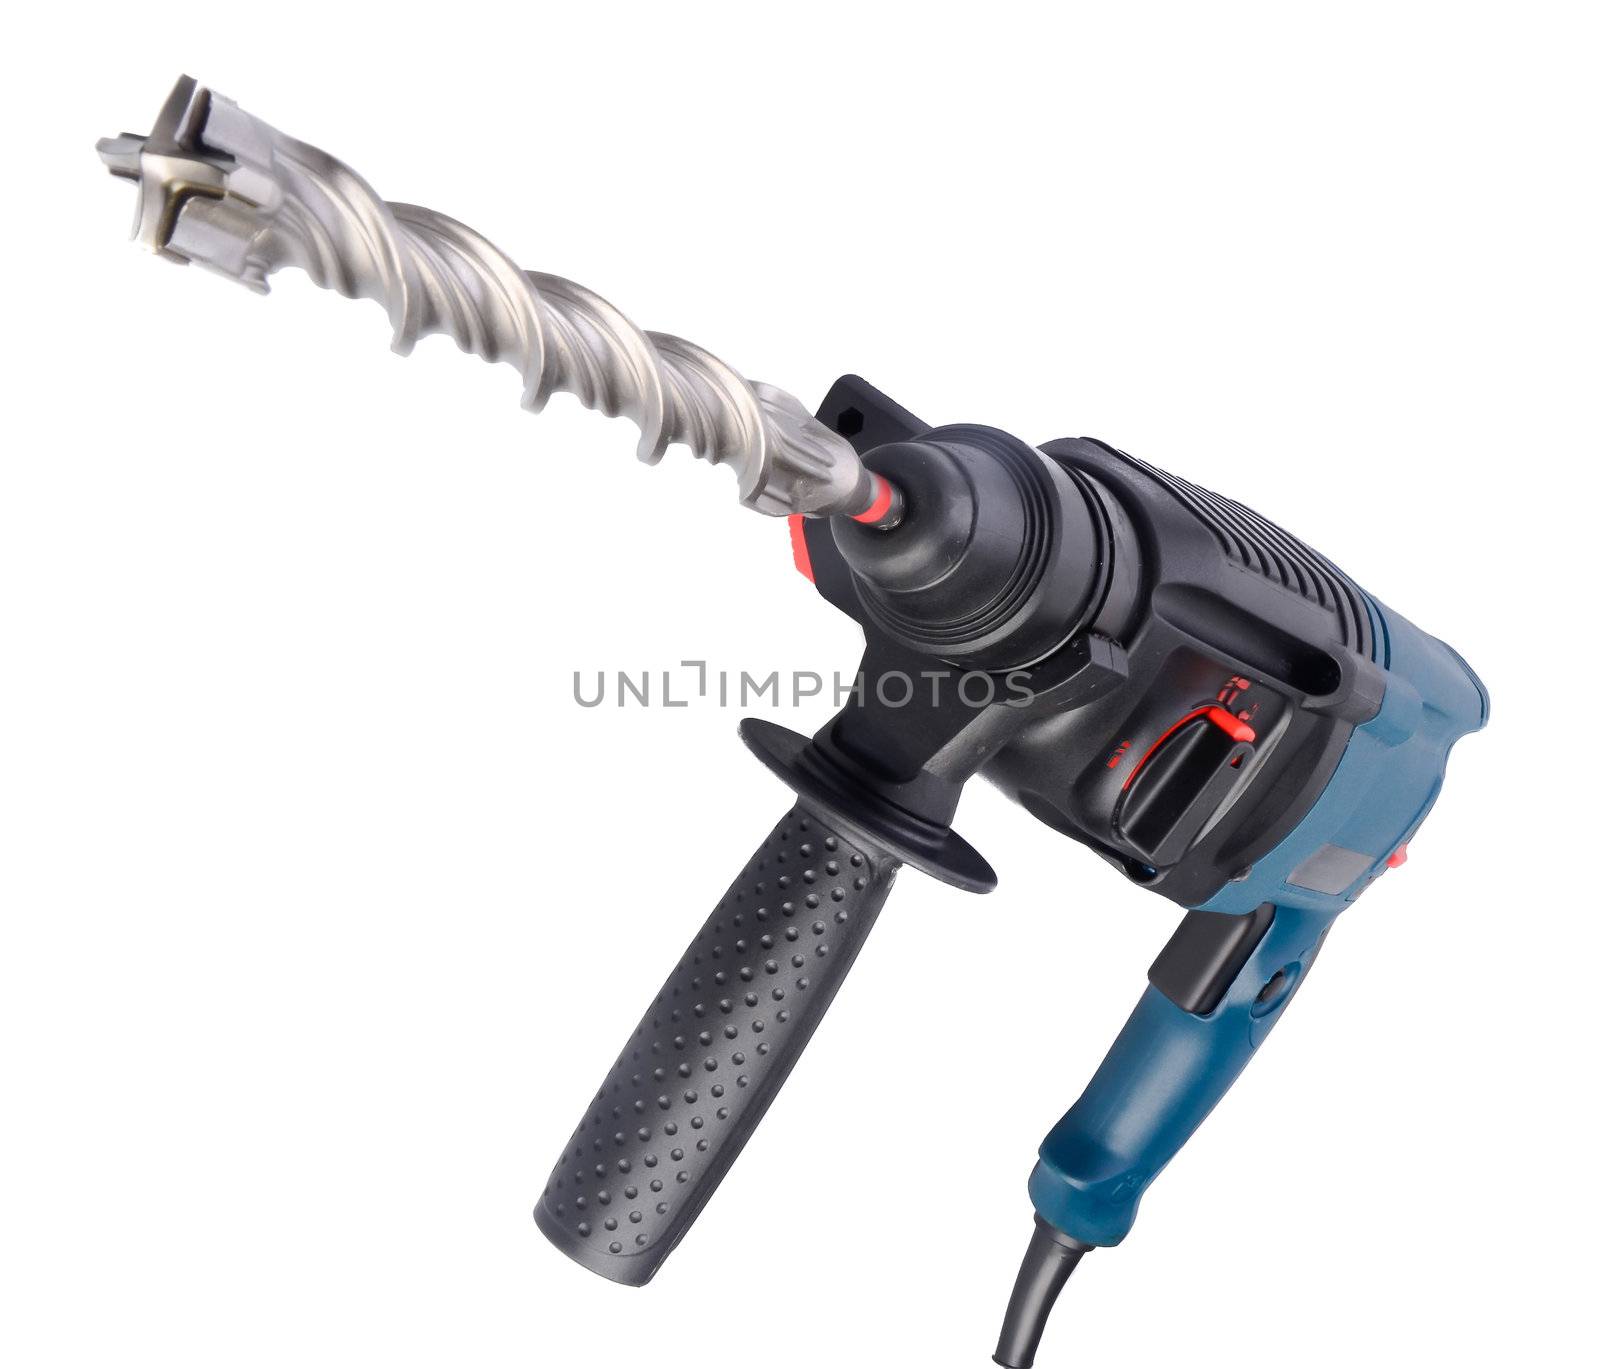 Electric drilling machine on a white background by heinteh